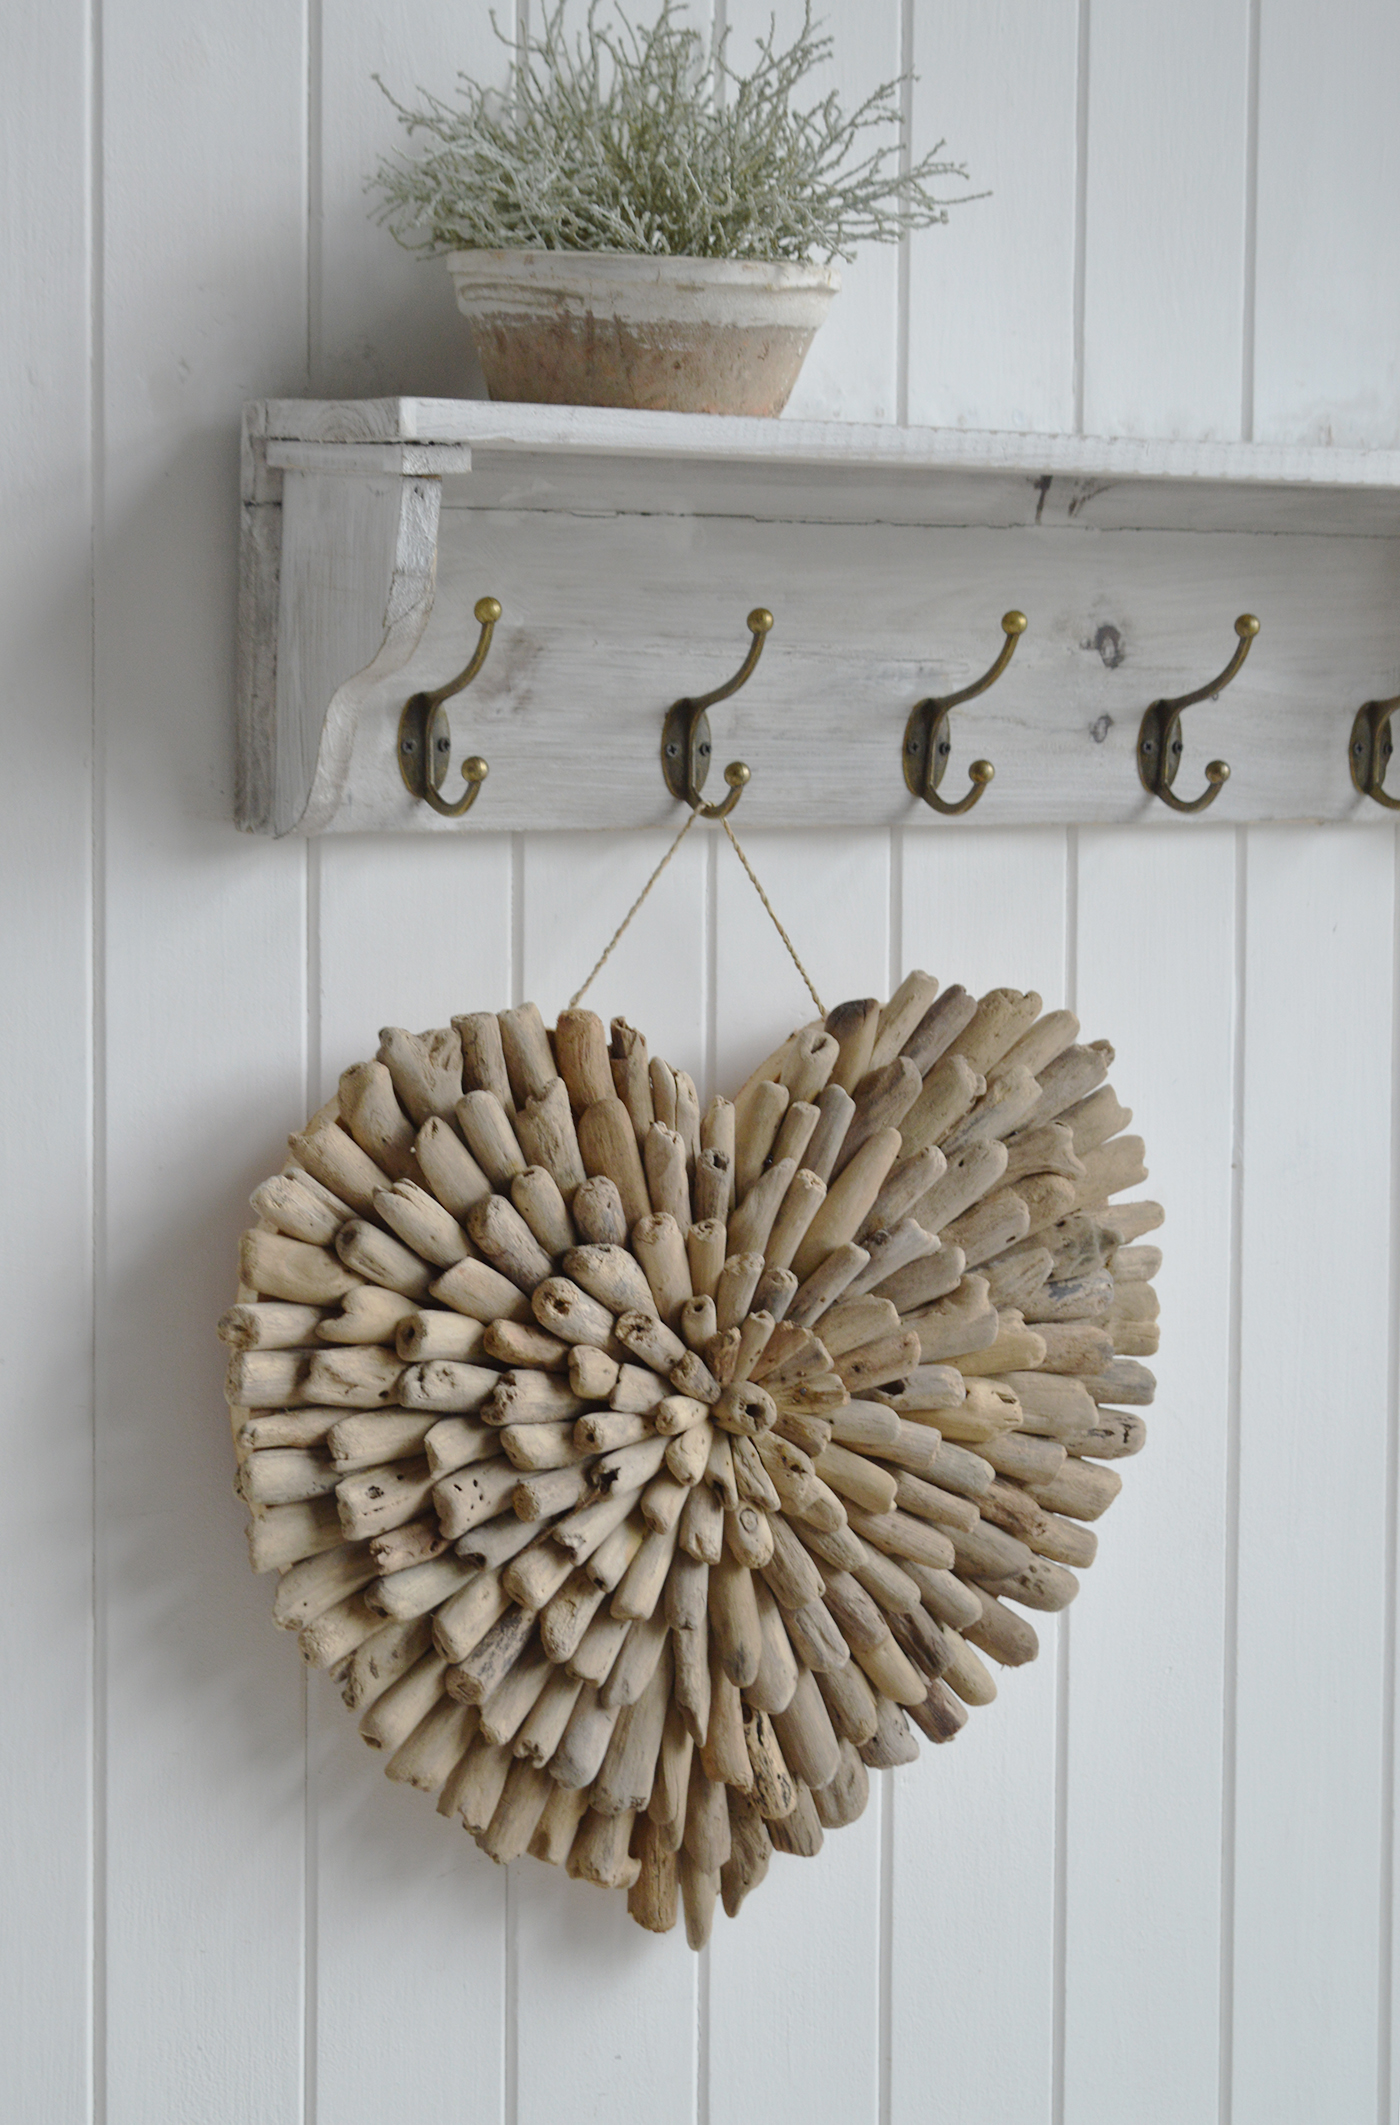 Driftwood heart. New England Coastal and Beach House Style Home Decor and home decor accessories for the home interiors